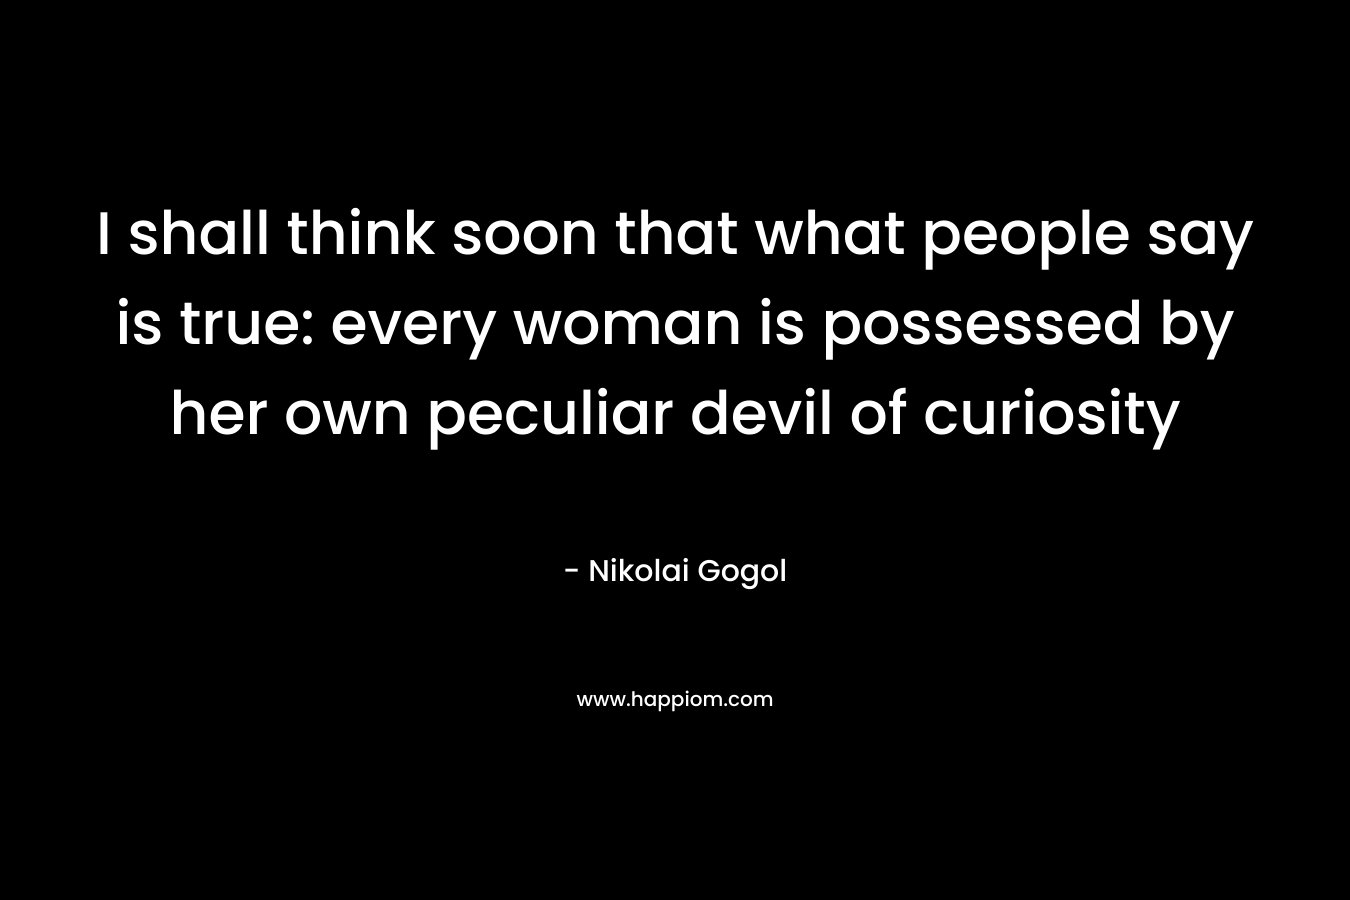 I shall think soon that what people say is true: every woman is possessed by her own peculiar devil of curiosity – Nikolai Gogol